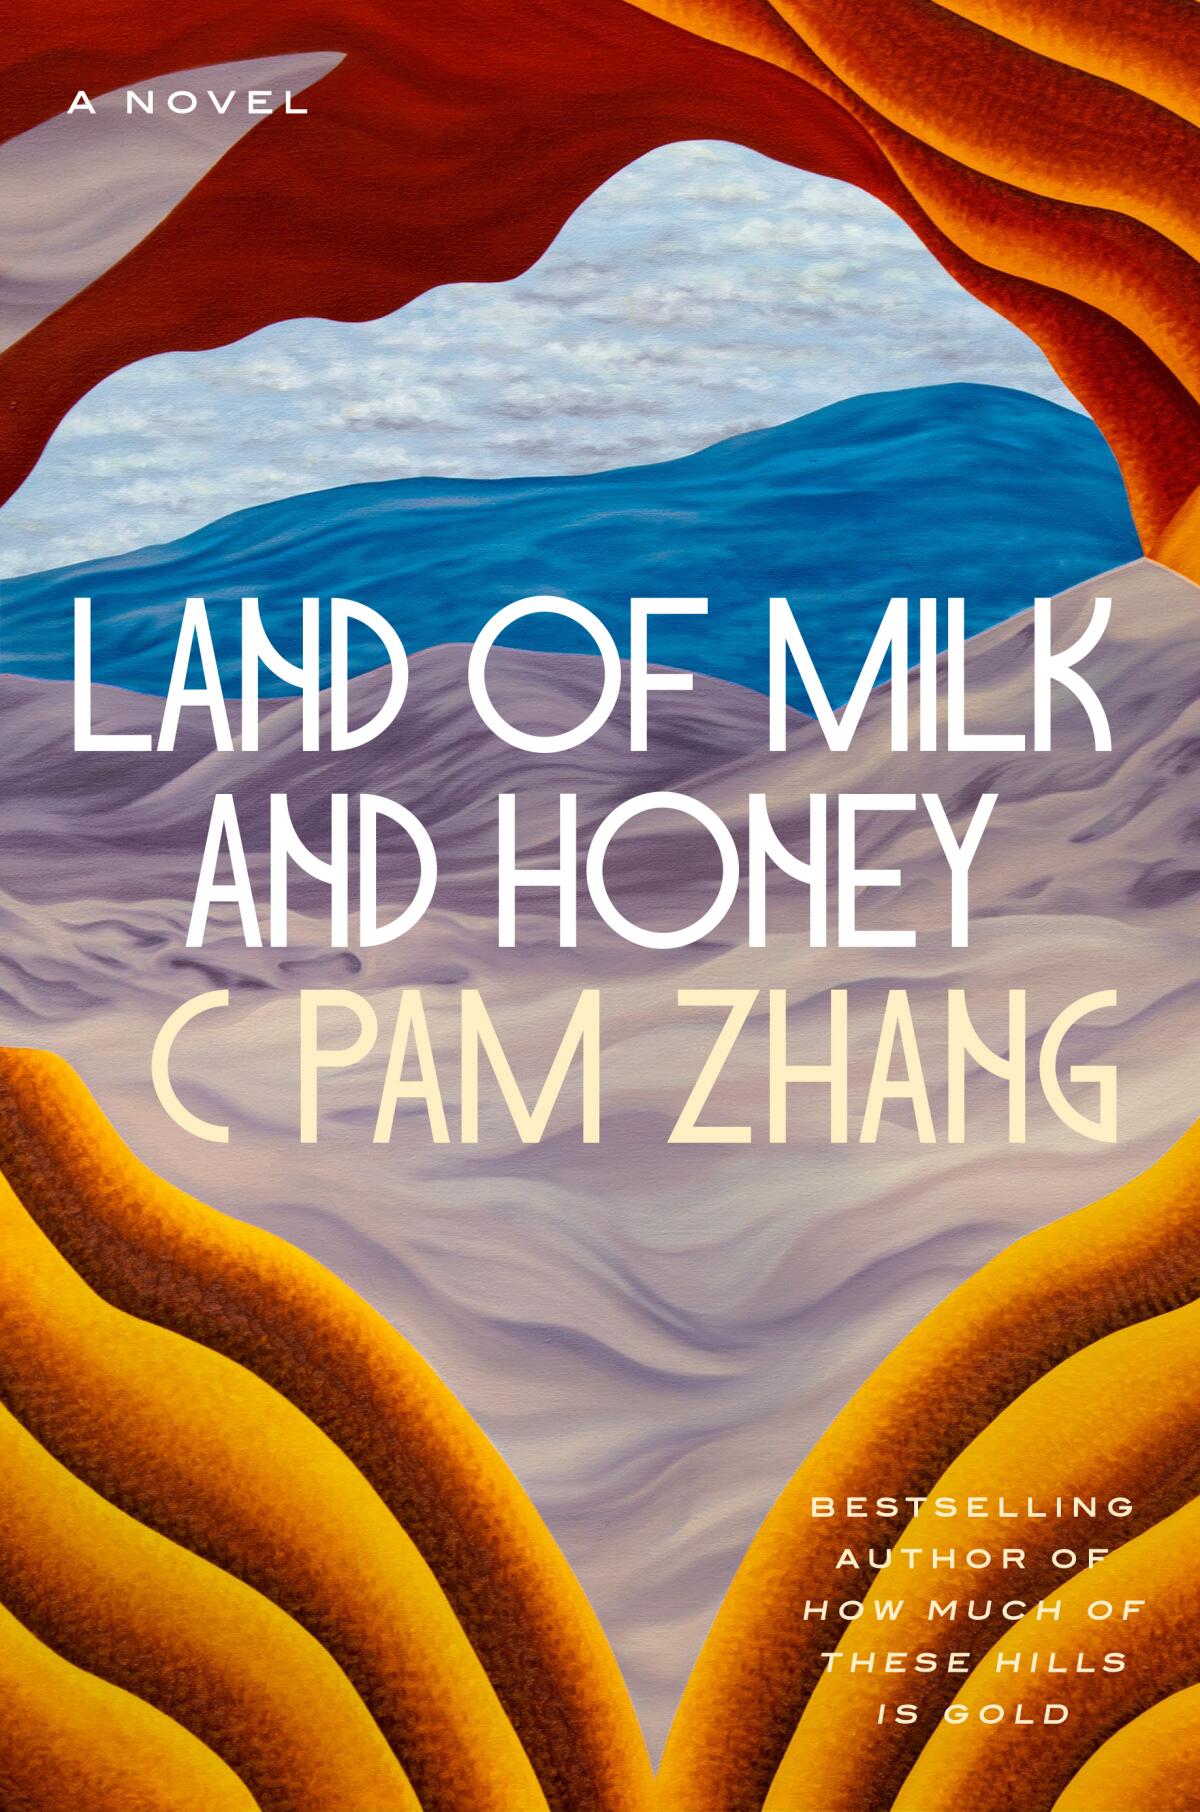 "Land of Milk and Honey," by C Pam Zhang